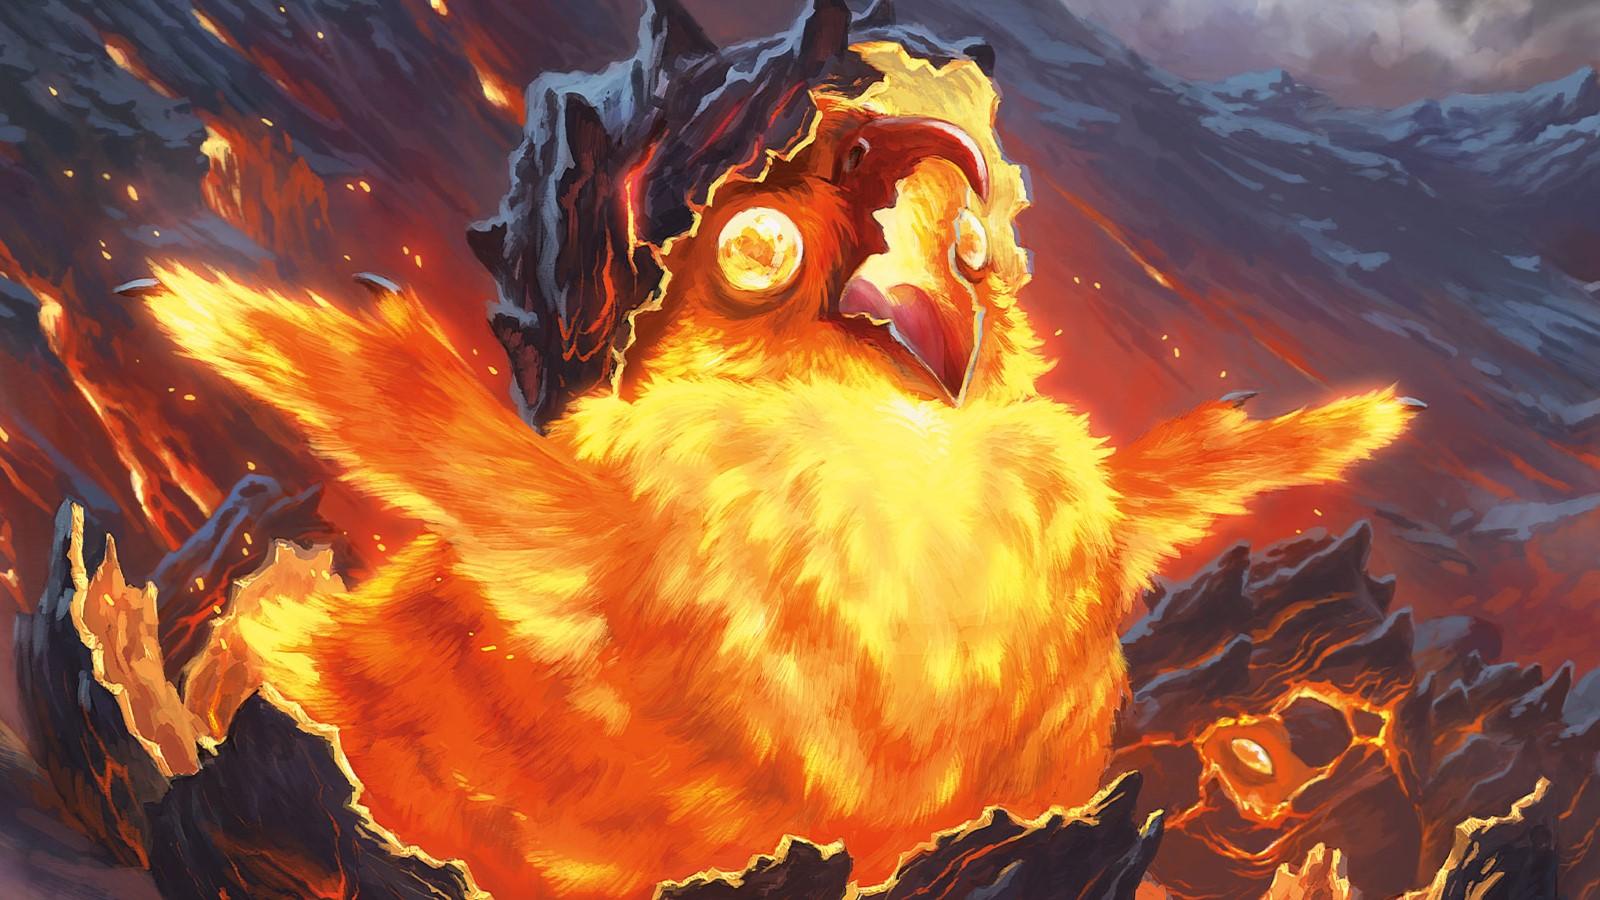 Banner image of a hatching phoenix